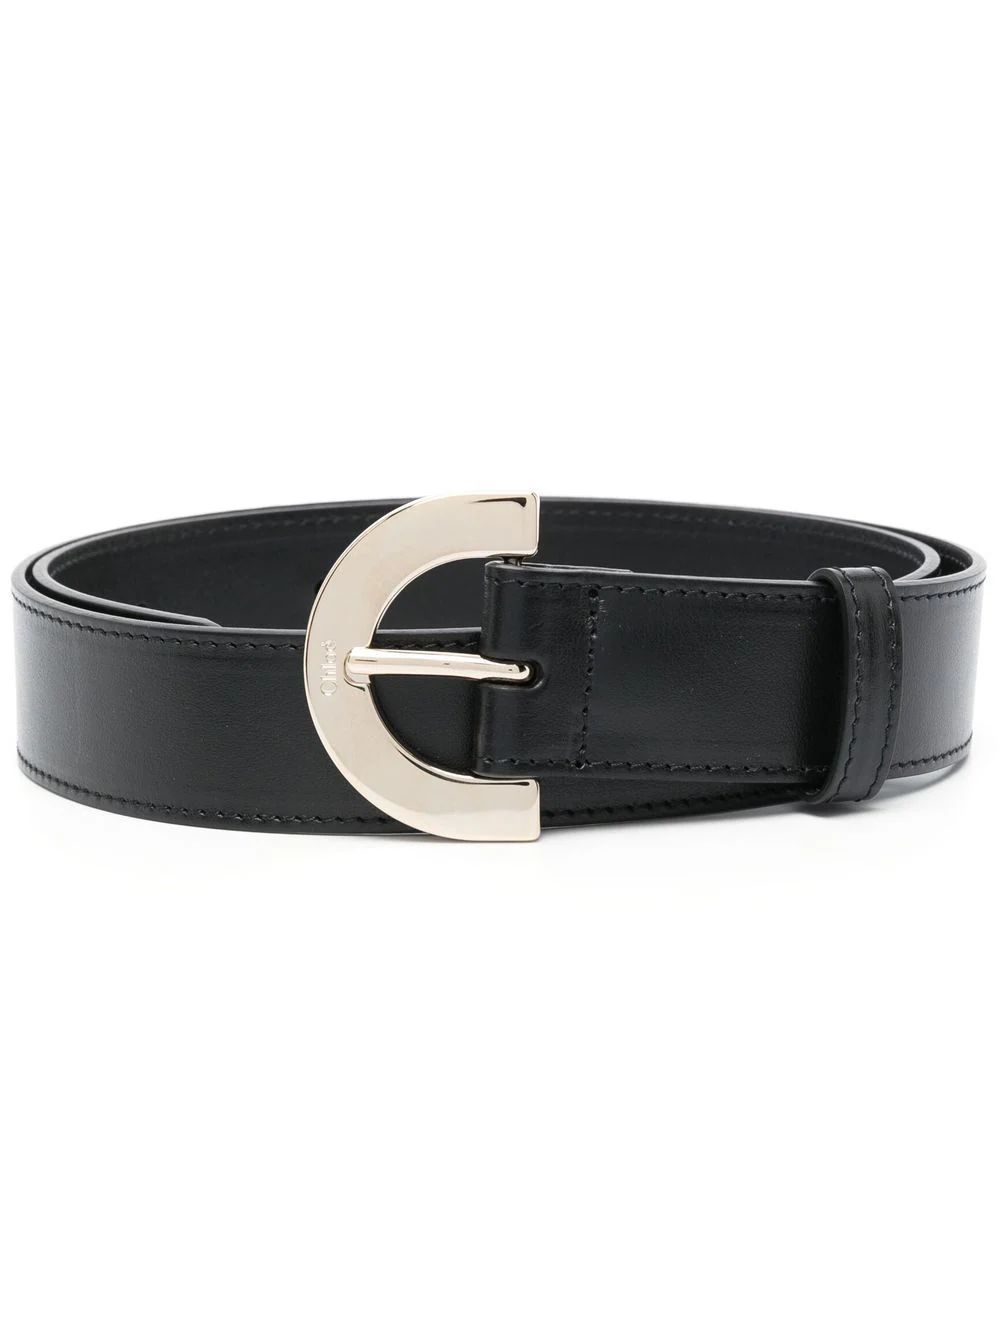 Chloébuckle-fastening leather belt$345Import duties included | Farfetch Global